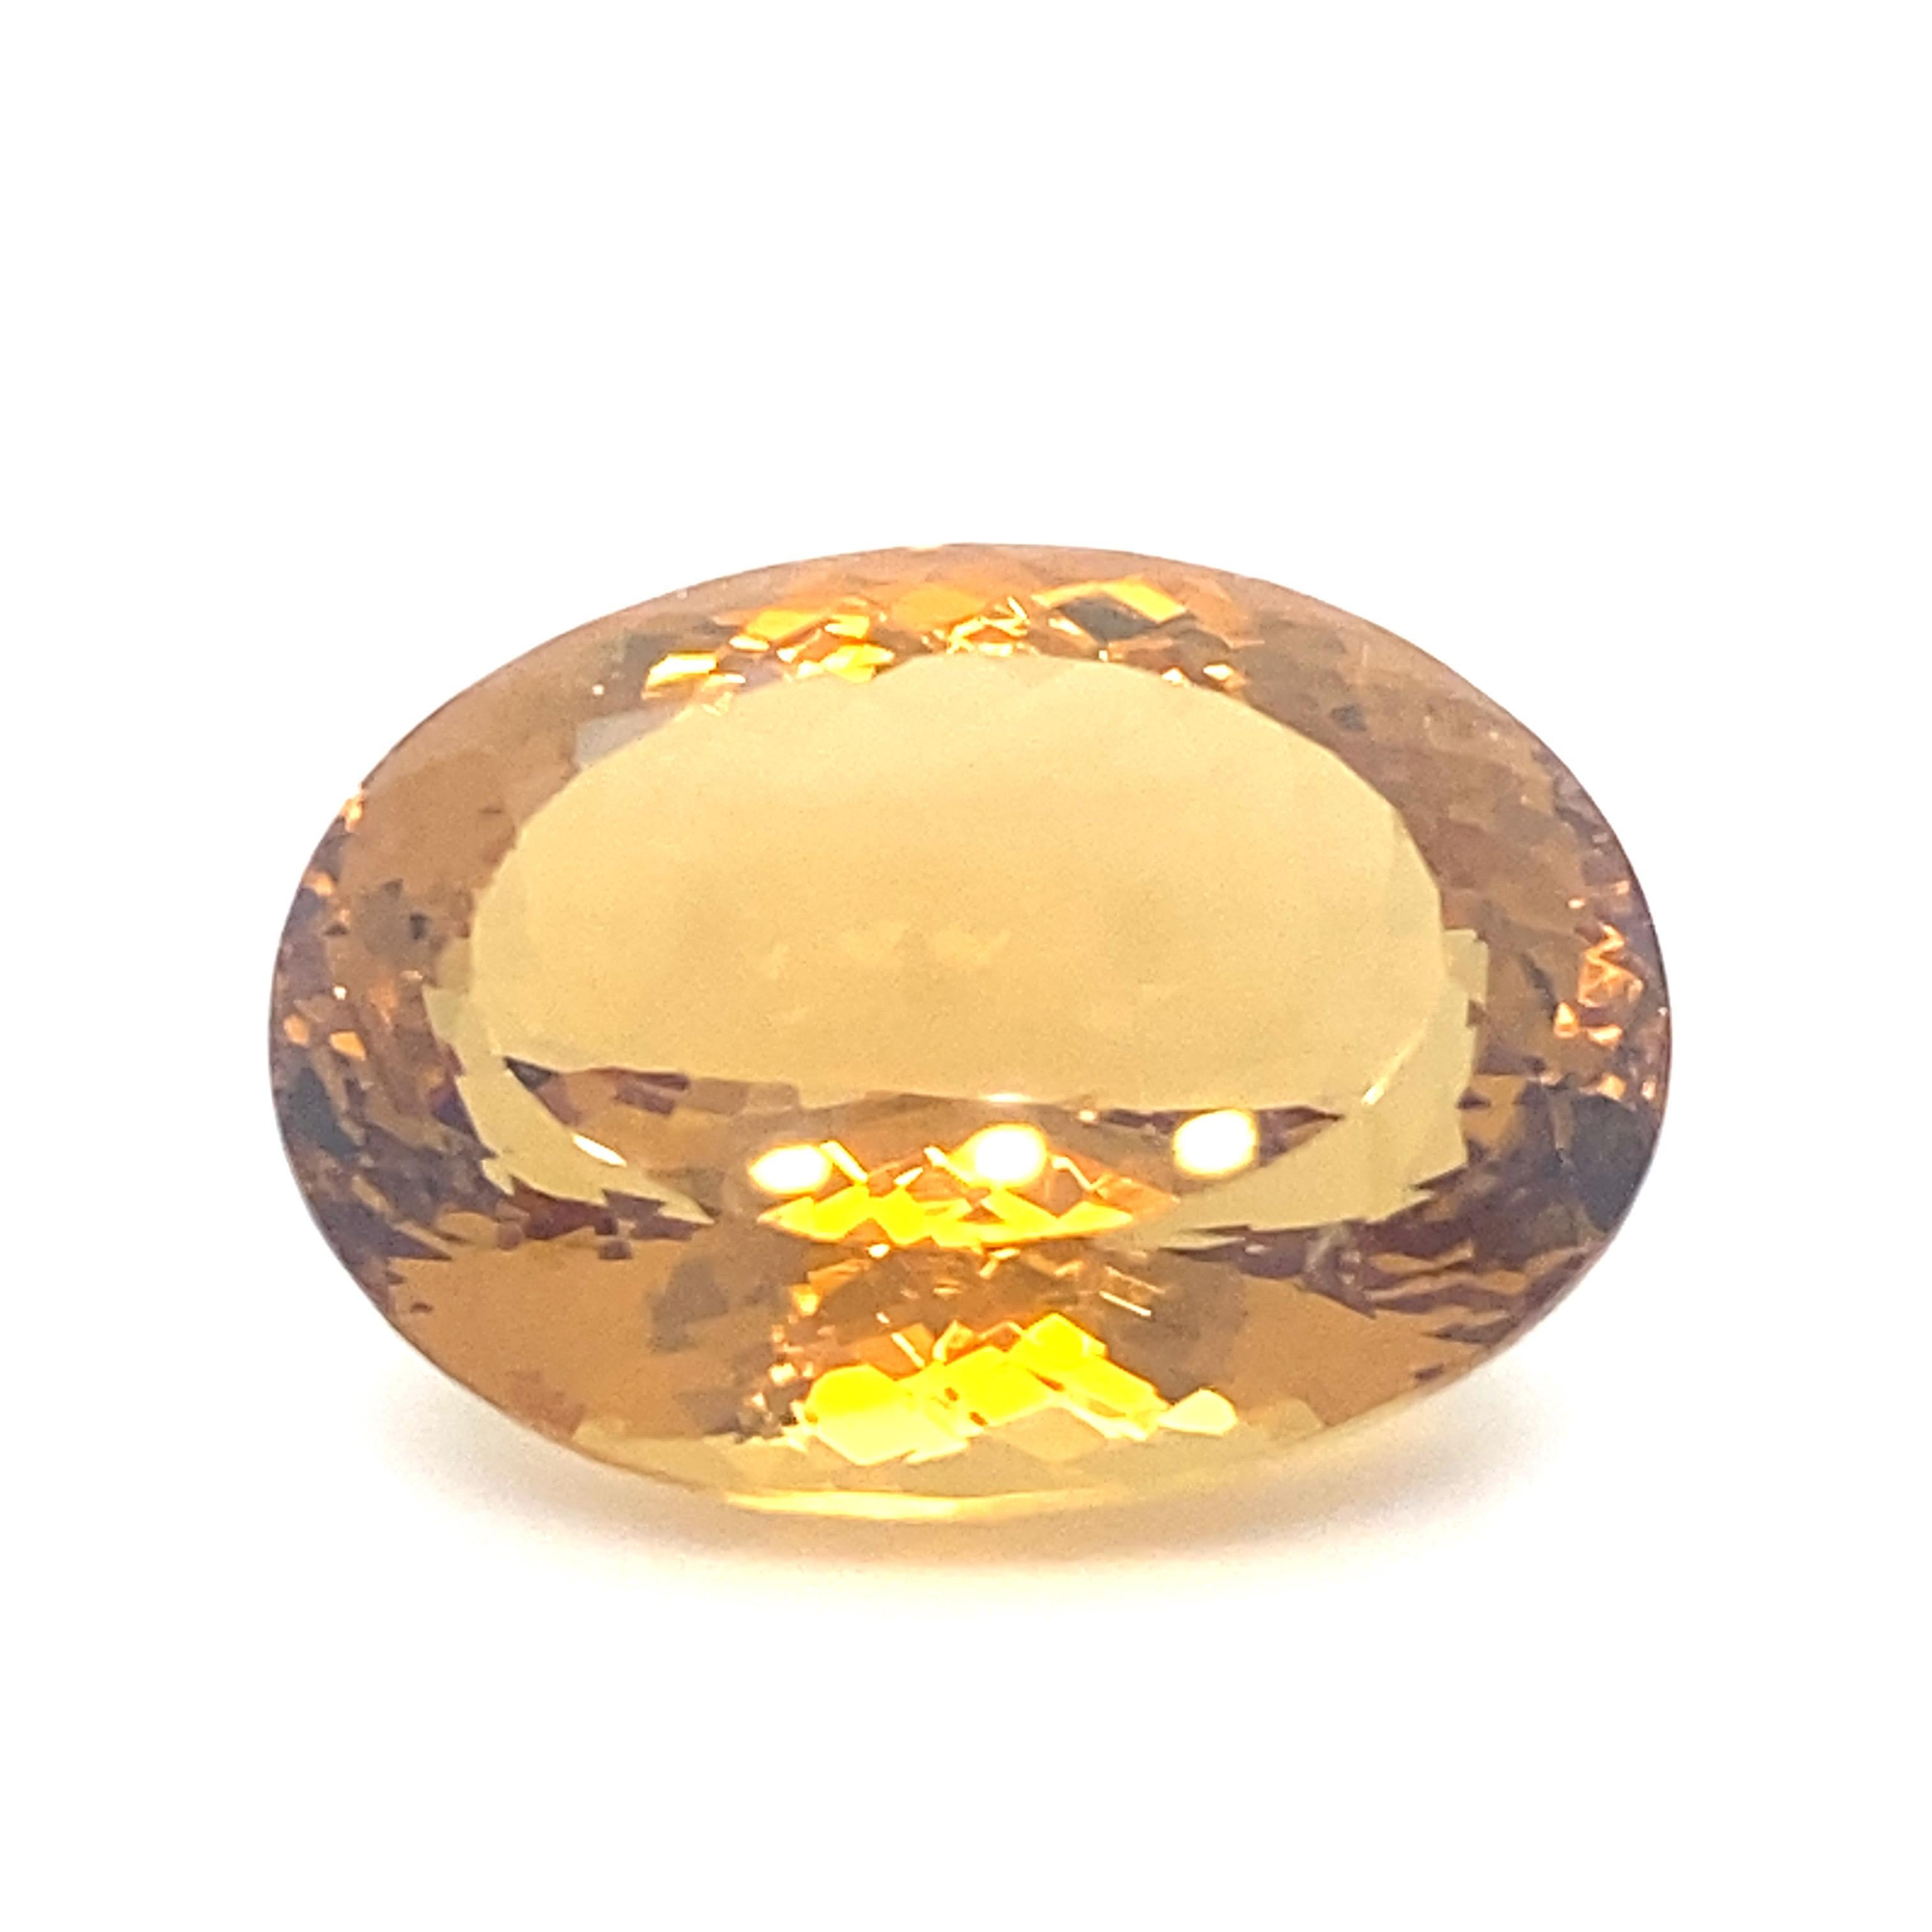 This GIA certified 67.75 Carat Natural Quartz Citrine Oval loose gemstone has modified brilliant cut. It has yellow-orange color and is transparent. Carefully hand cut and hand polished by skilled craftsmen. Turn it into a desirable piece of jewelry